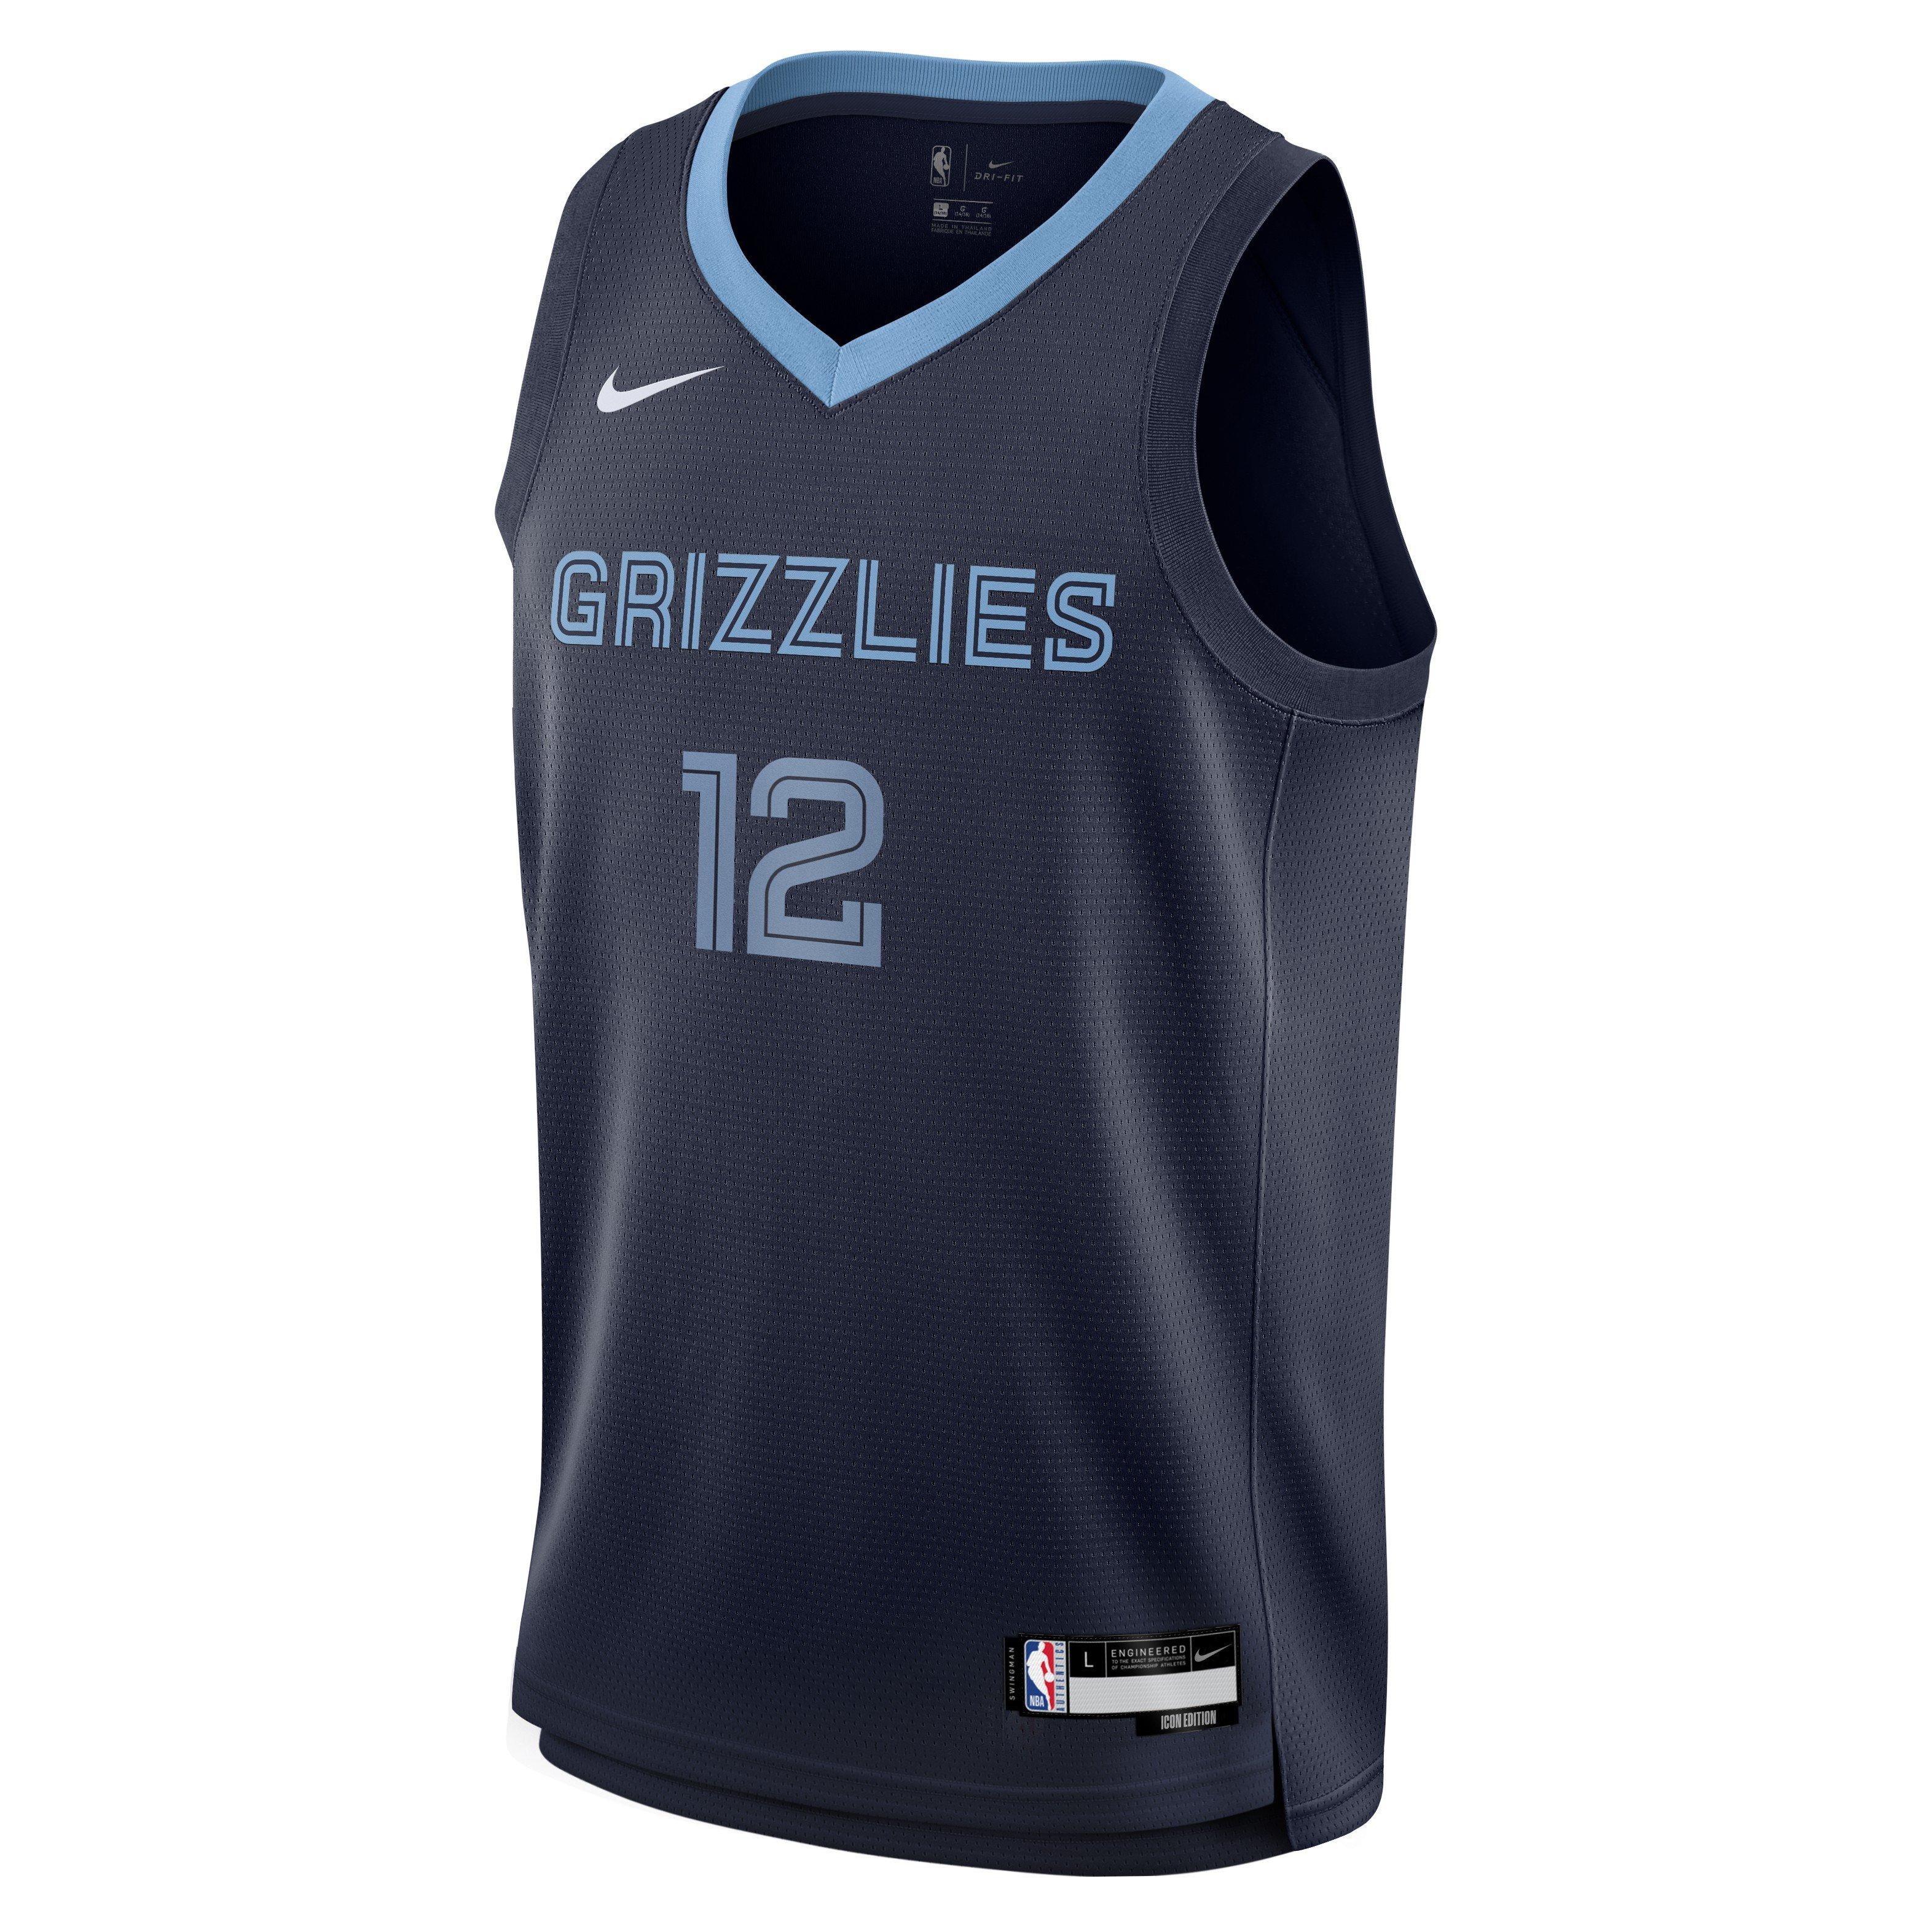 memphis grizzlies youth shorts